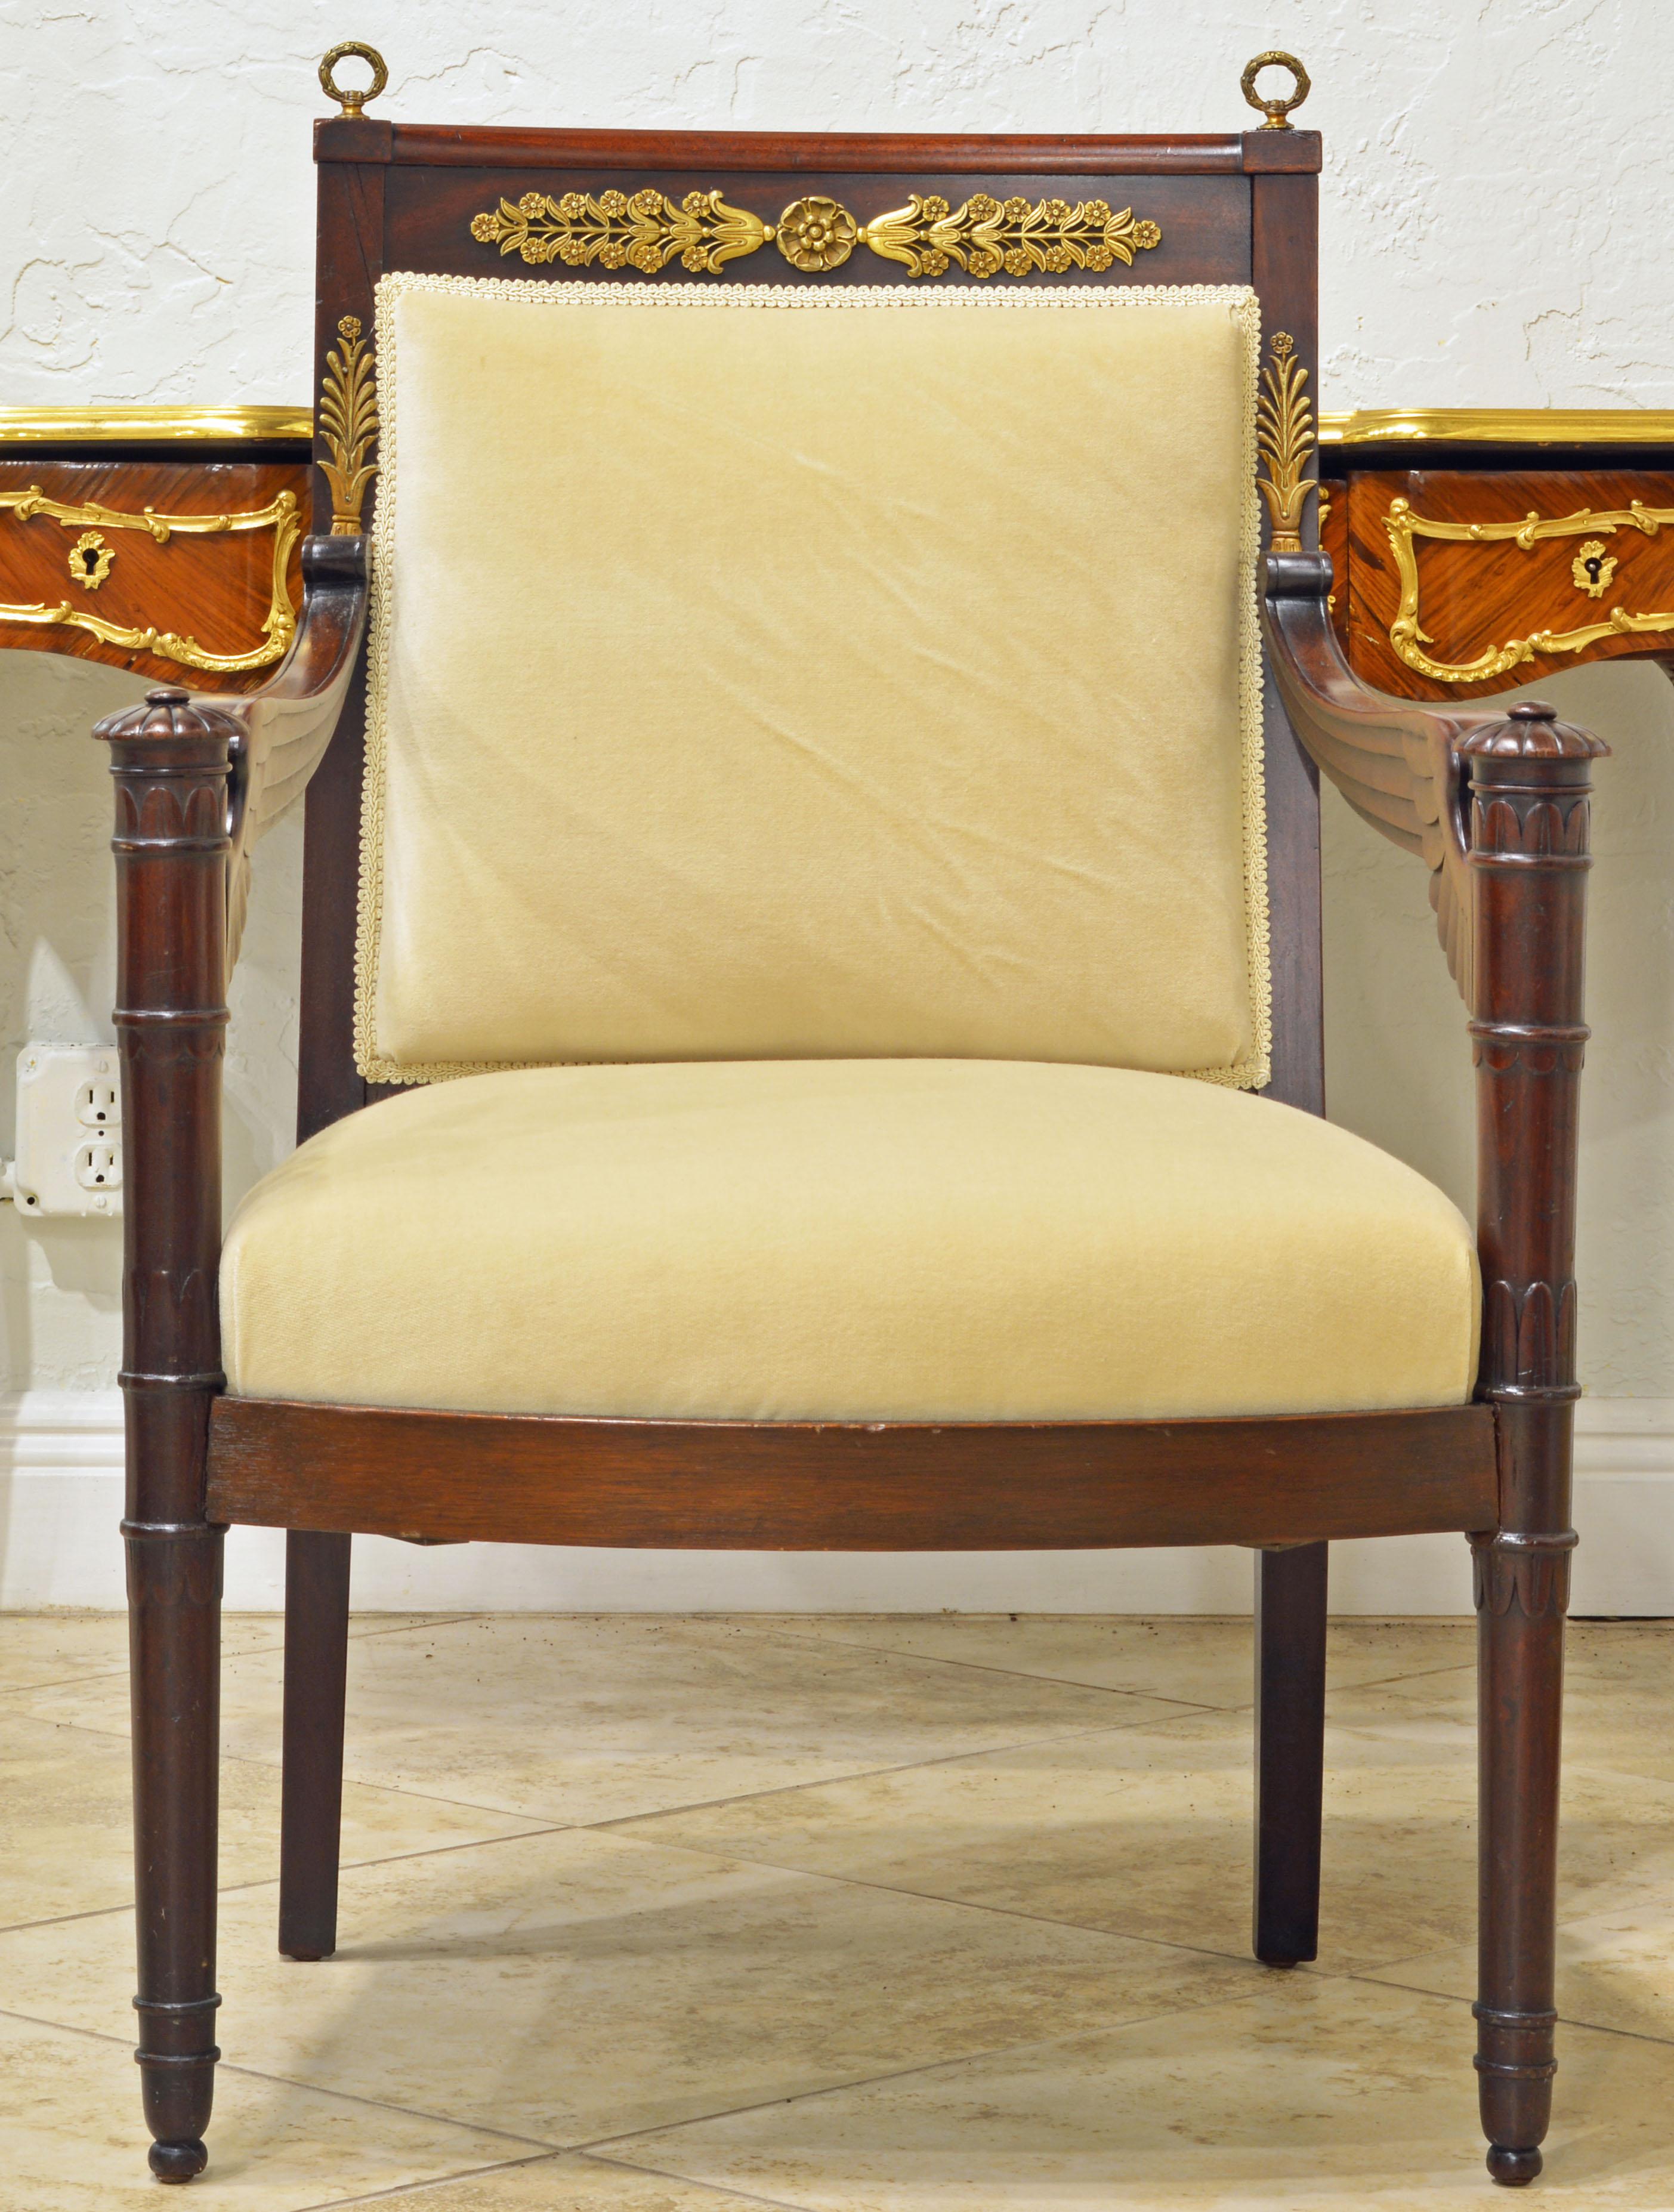 This elegant carved mahogany armchair resting on small casters dates to circa 1870 a time when Napoleon III was Emperor of the French. He adopted many of the stylistic elements first seen during his uncle's Napoleon I reign. The chair features